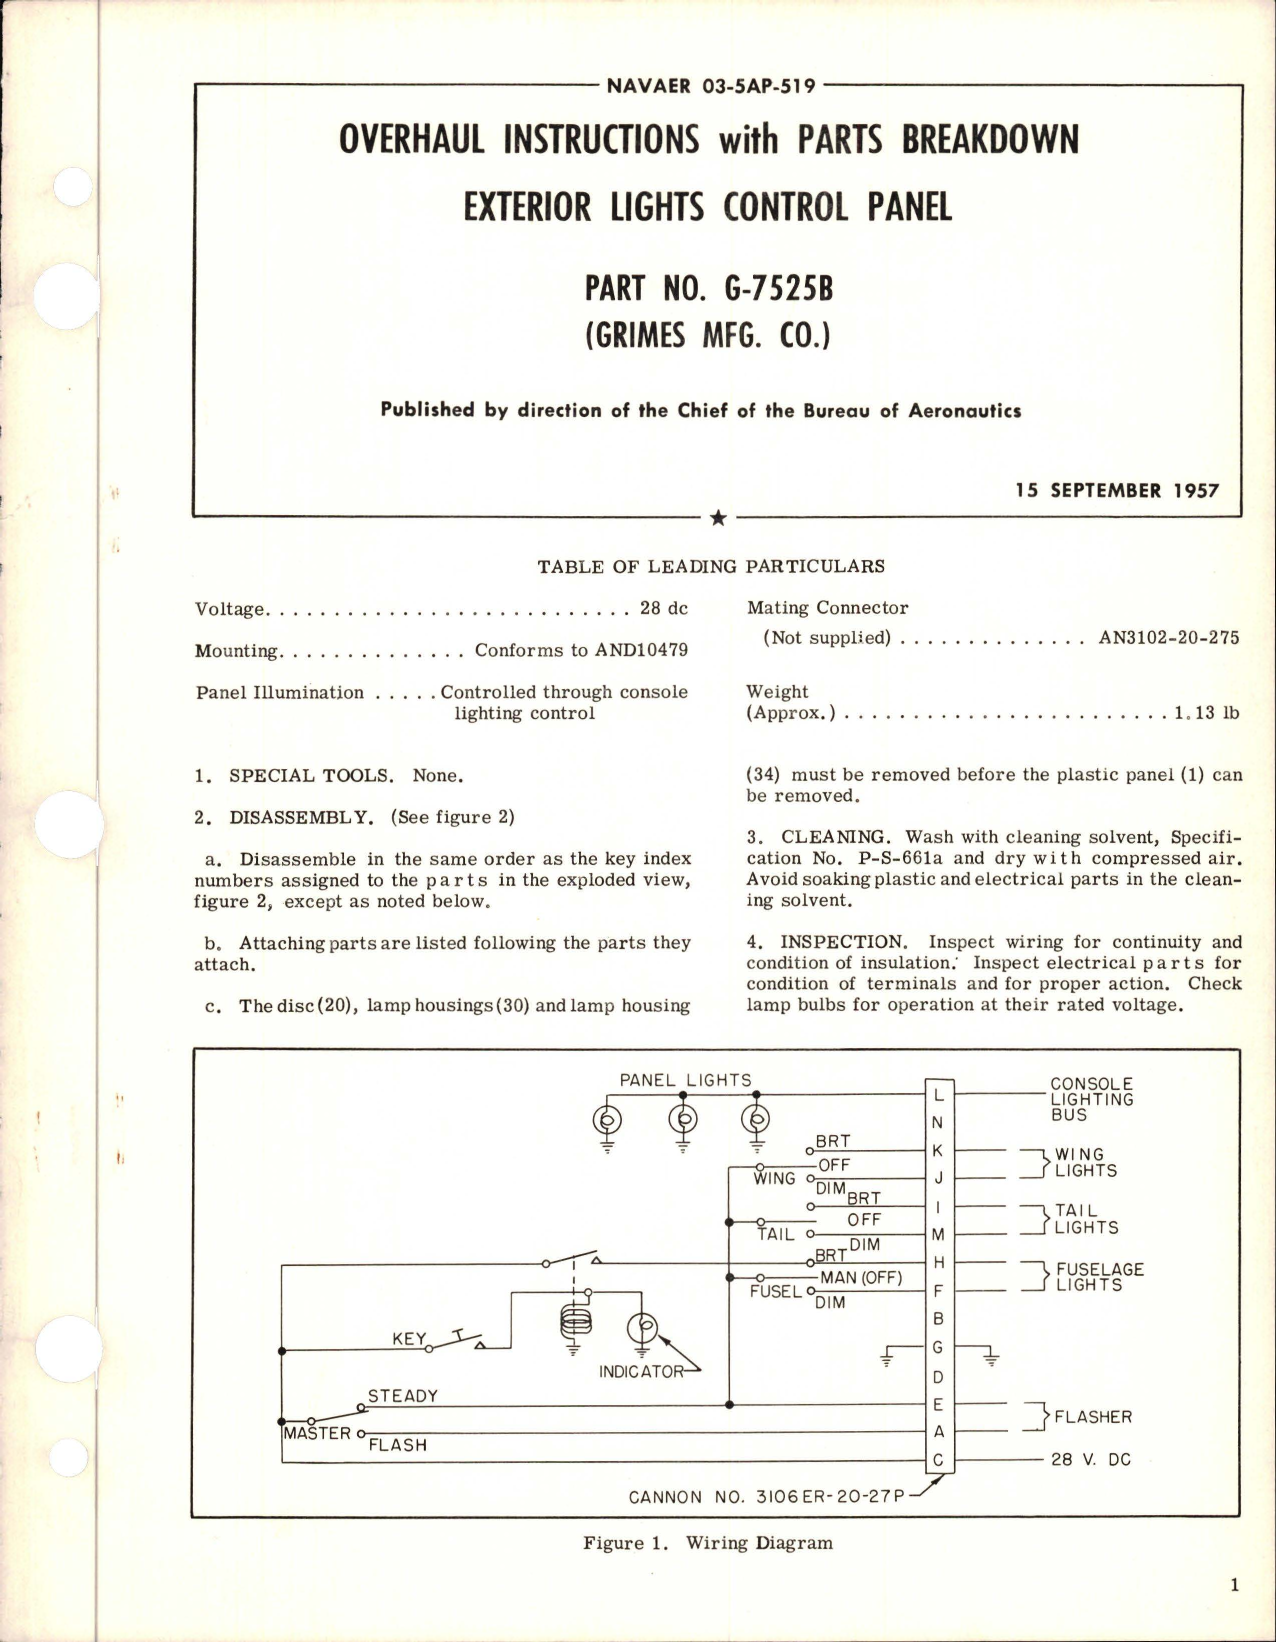 Sample page 1 from AirCorps Library document: Overhaul Instructions with Parts Breakdown for Exterior Lights Control Panel - Part G-7525B